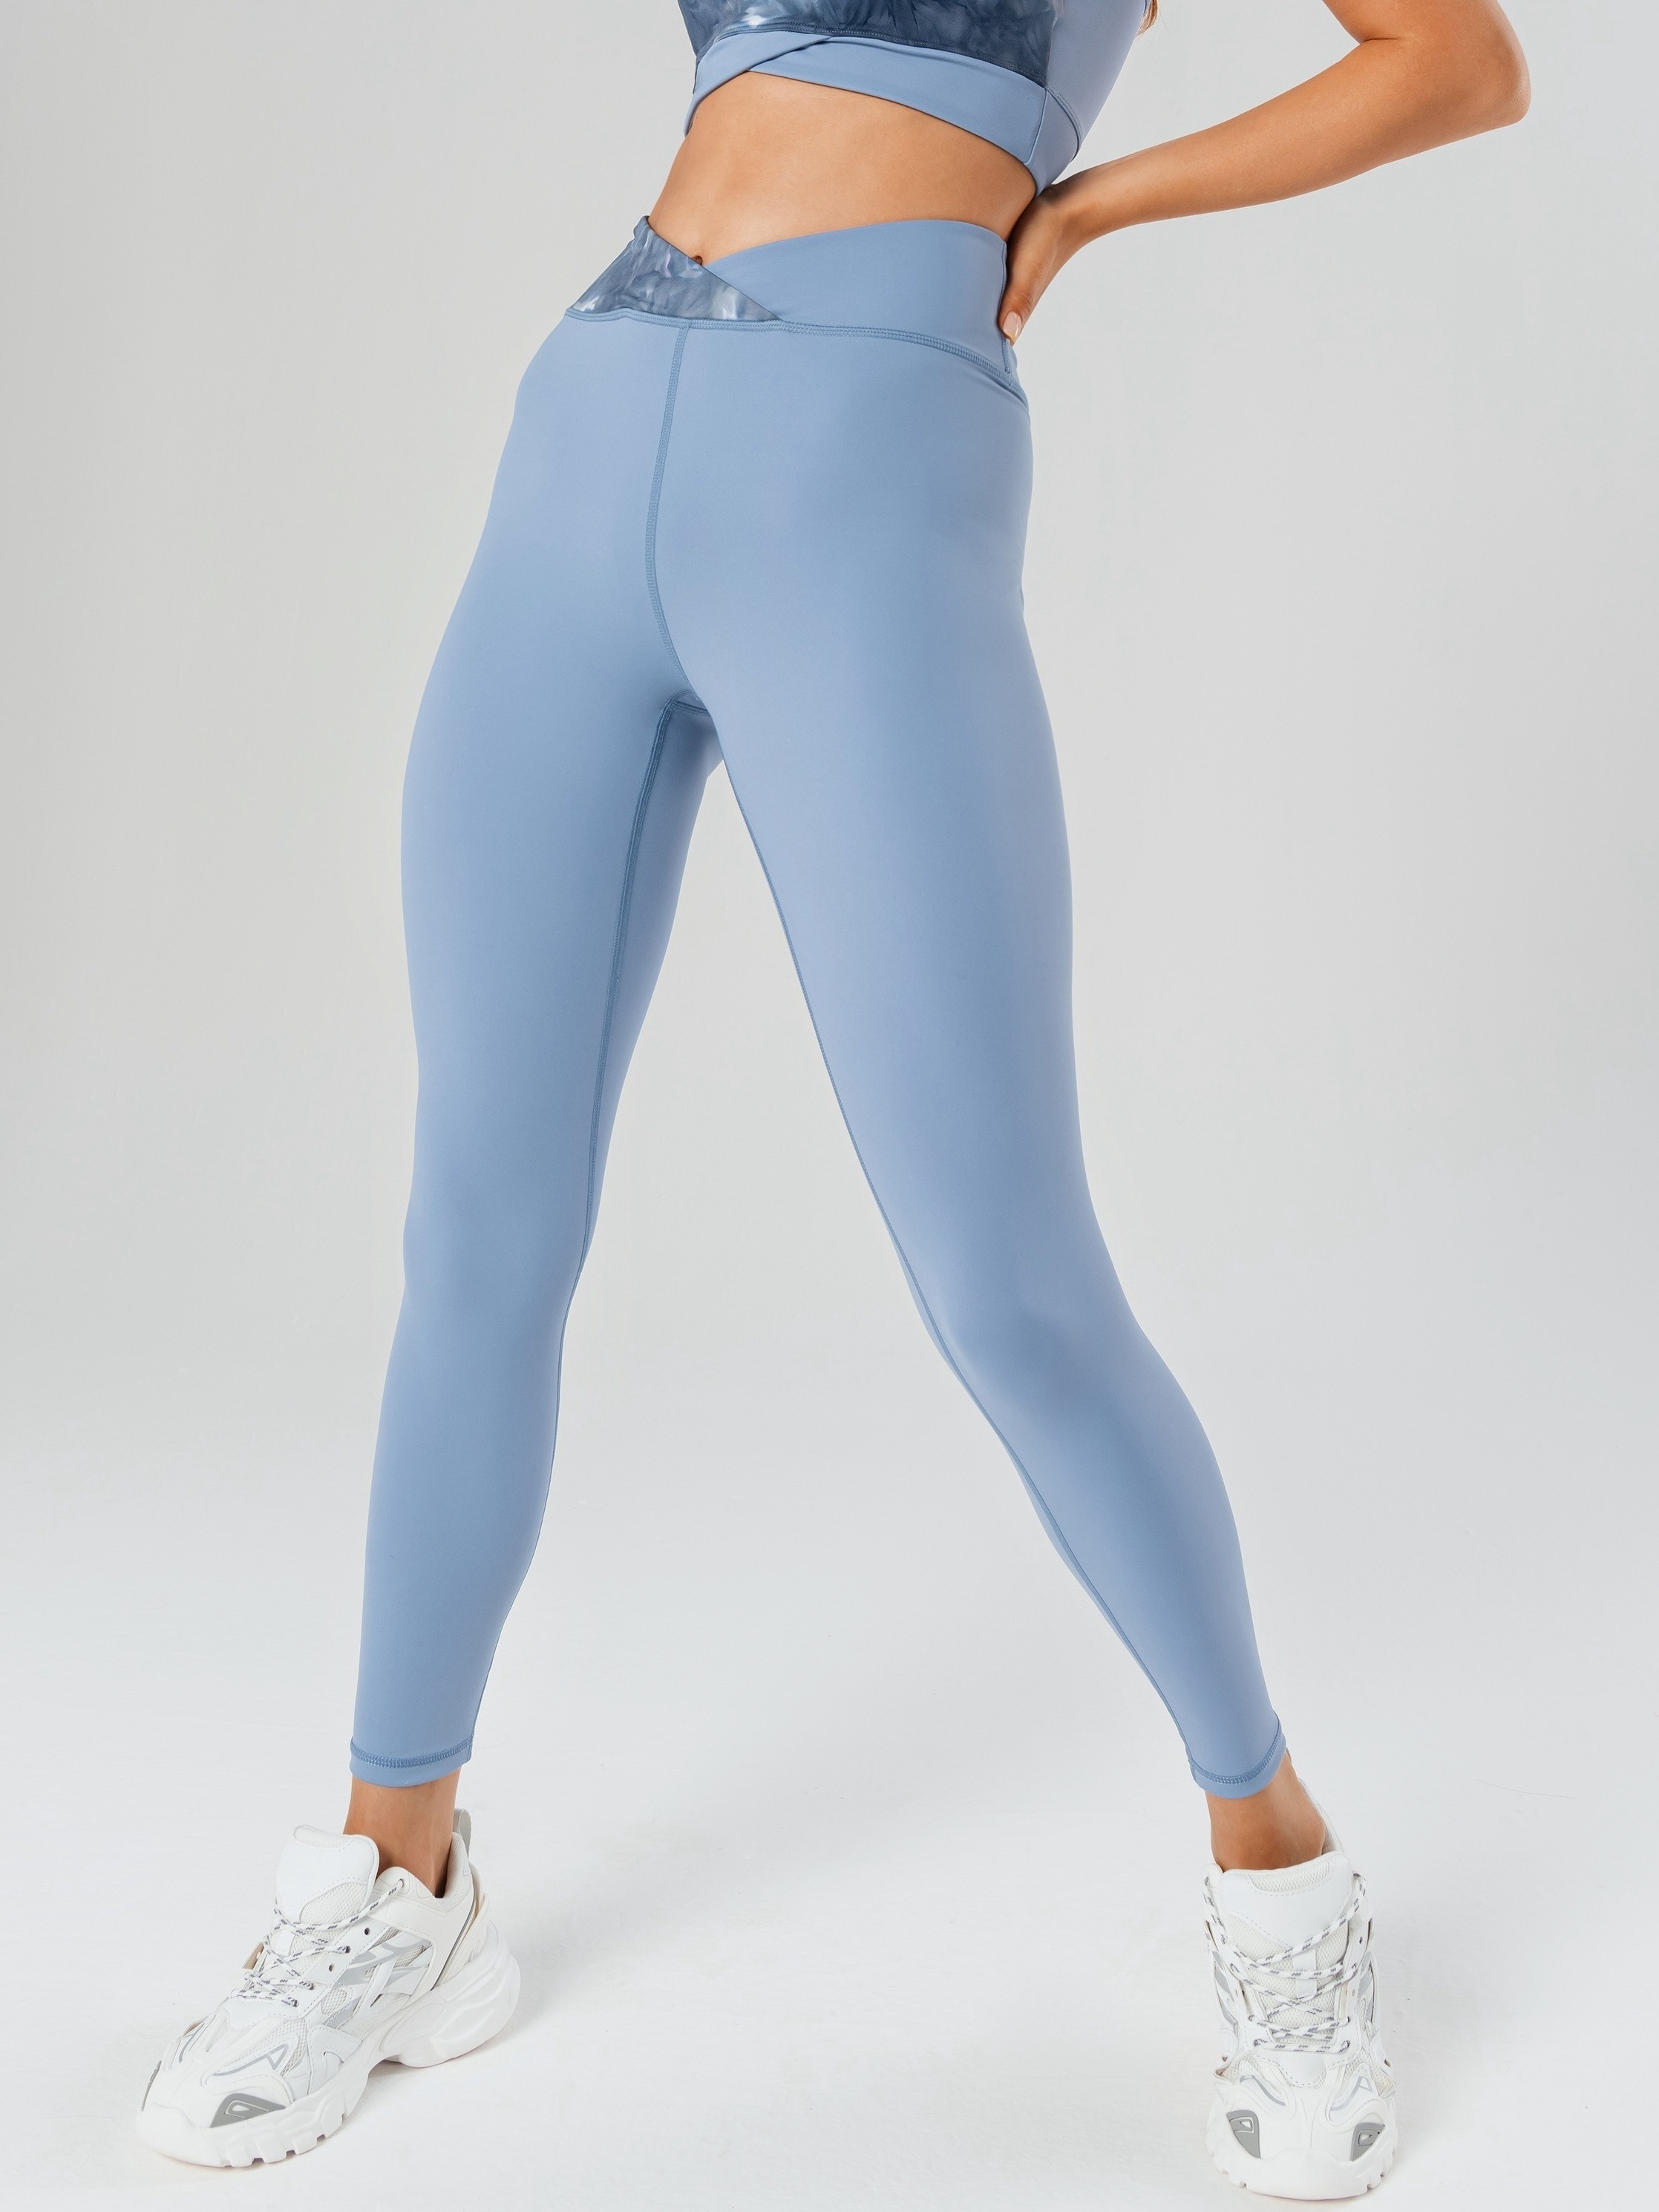 Stretchy Solid Color High Waist Winter Leggings Butt Lifting